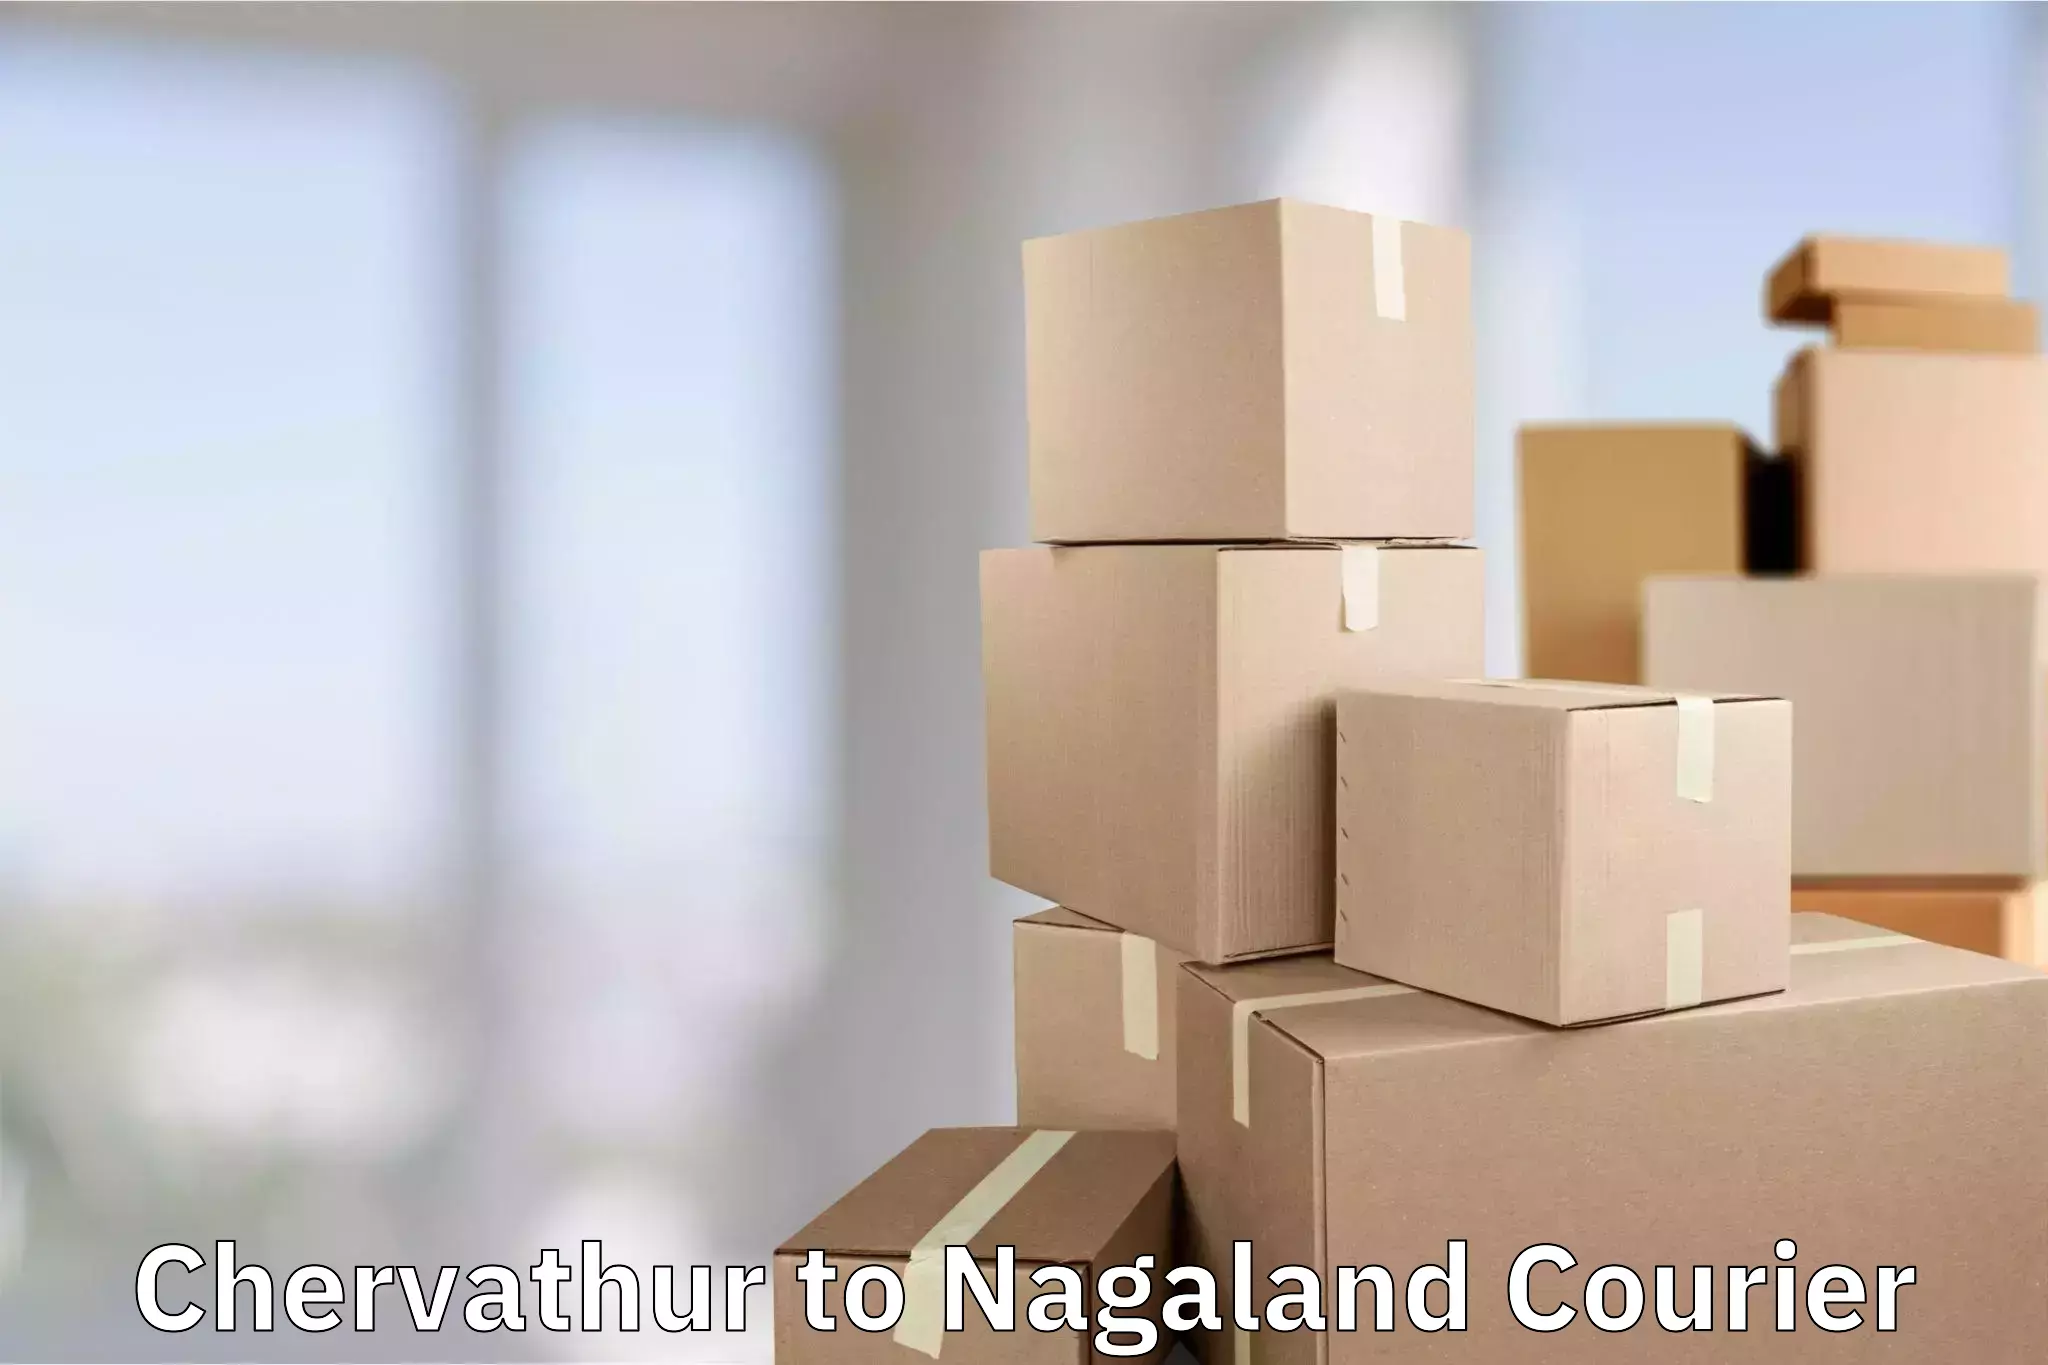 Baggage transport updates in Chervathur to Nagaland